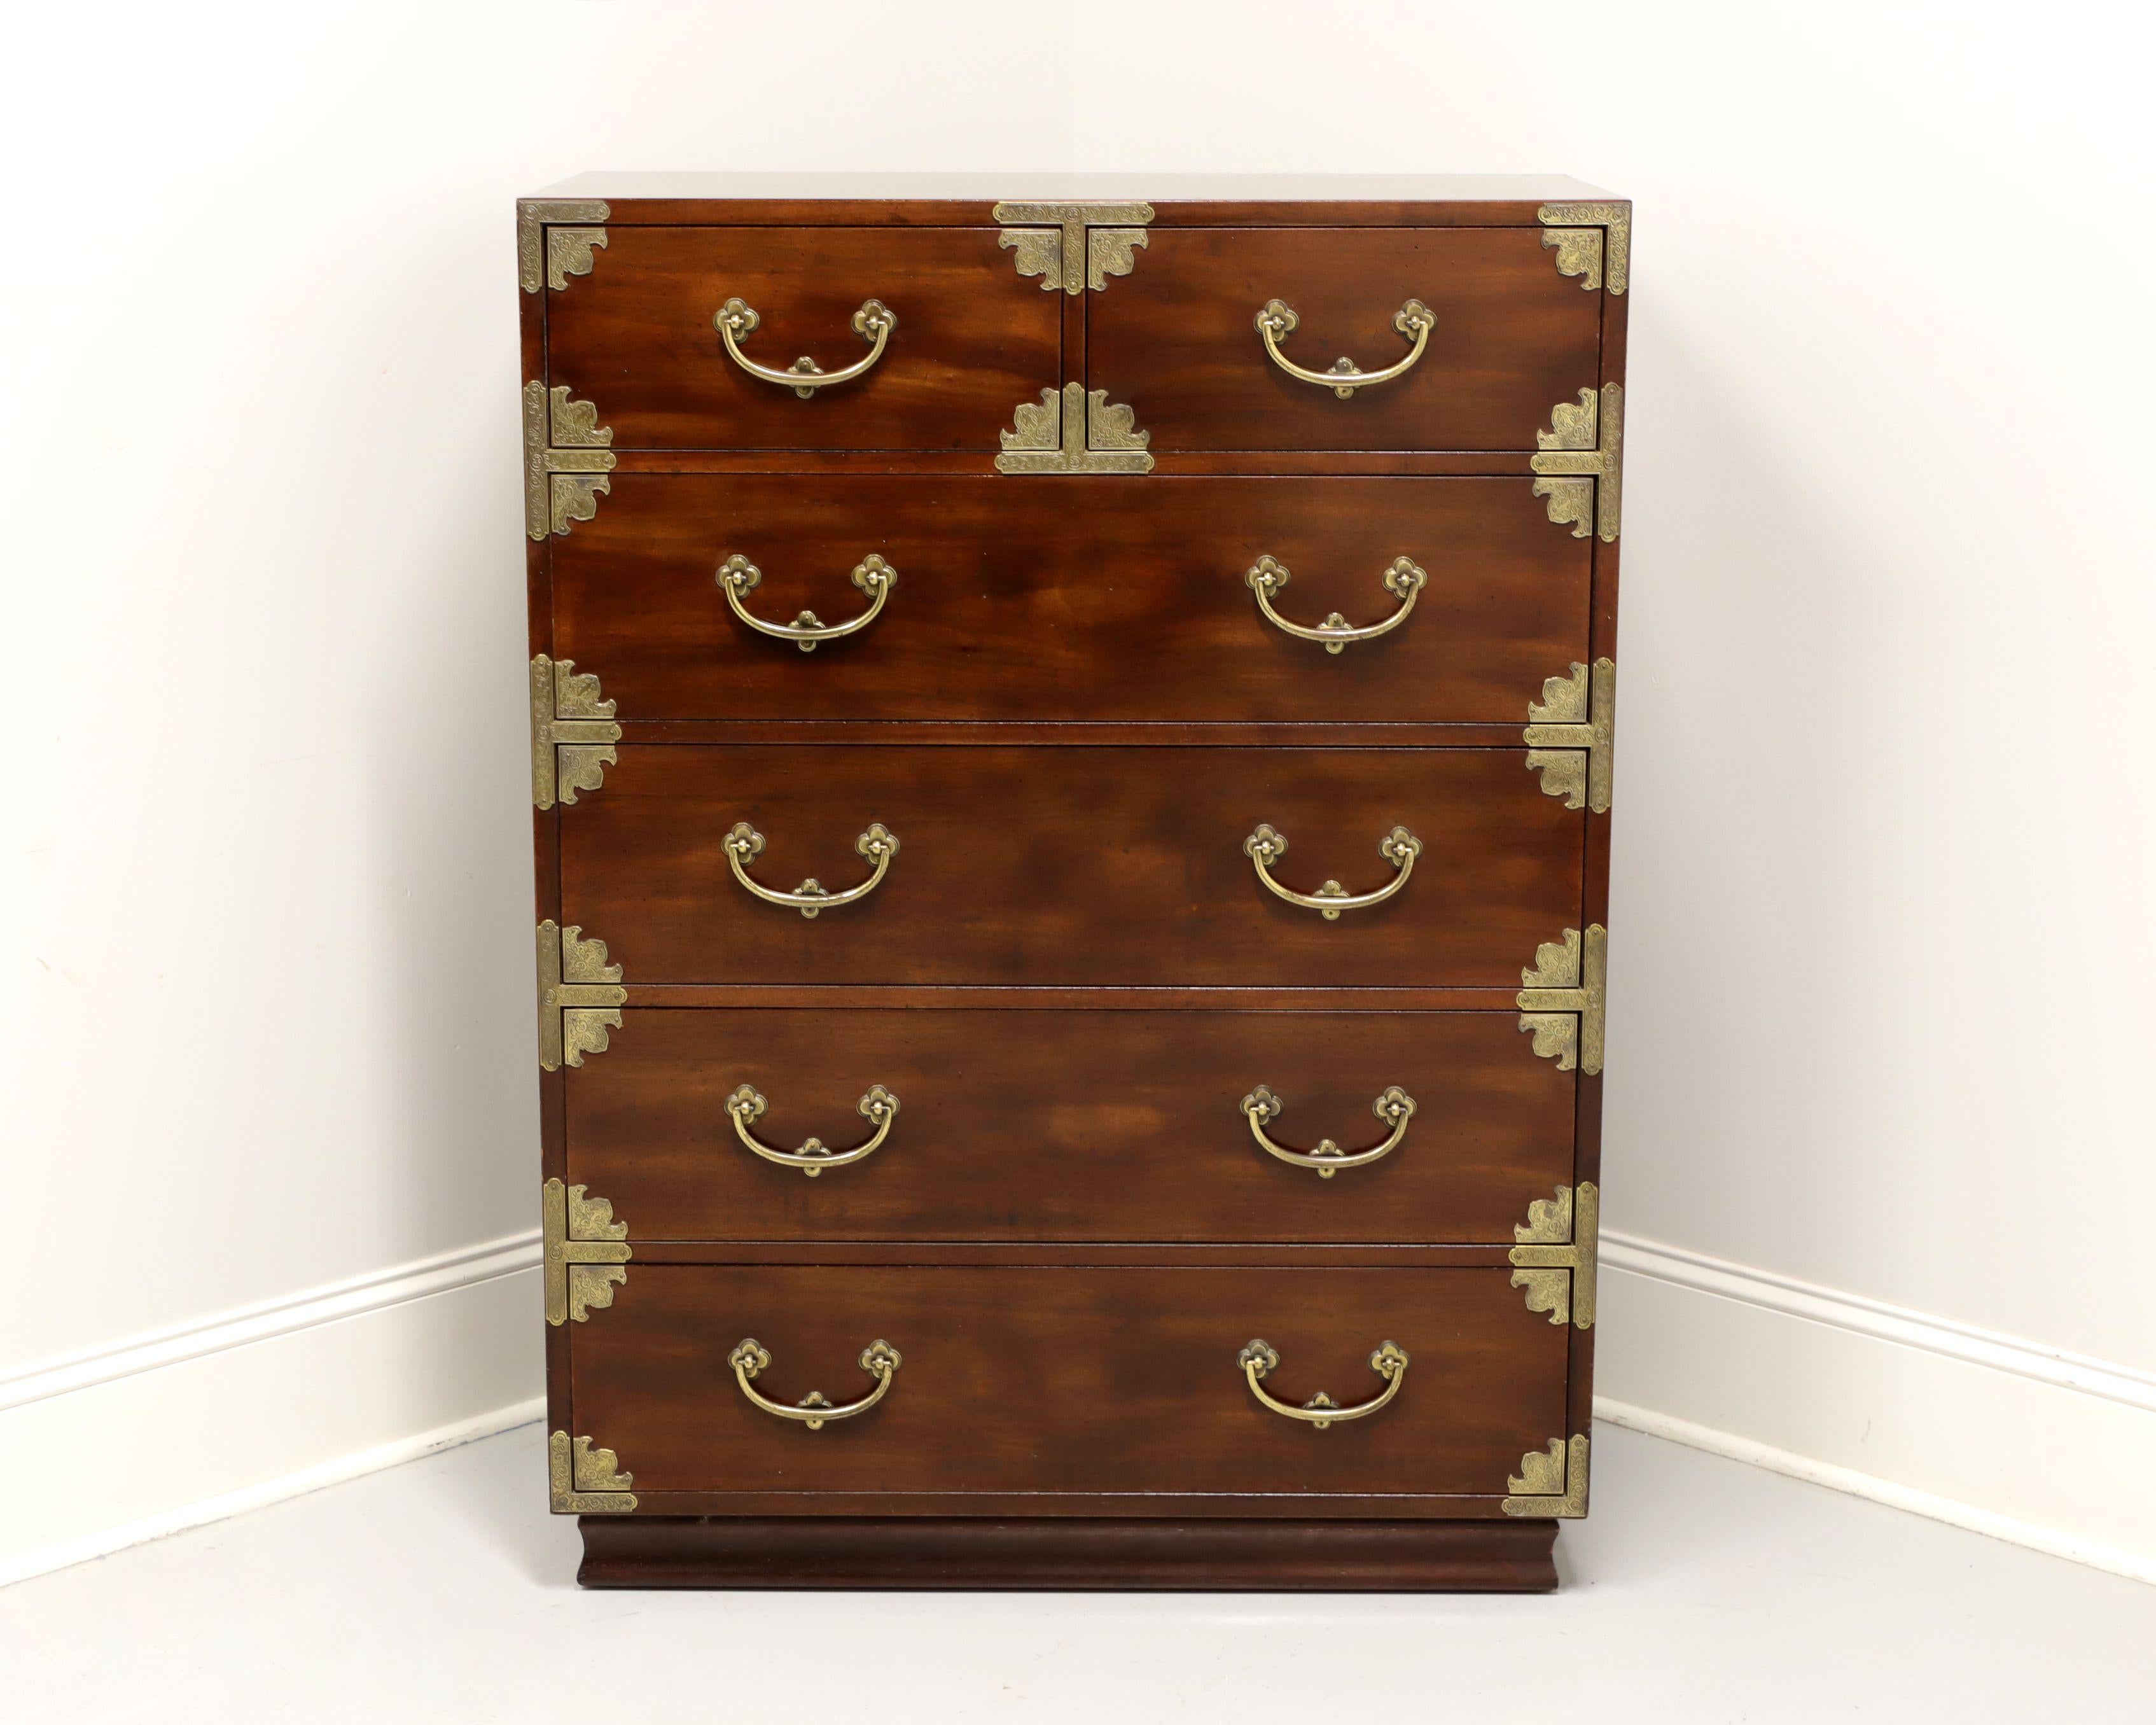 A chest of drawers in the Japanese Tansu Campaign style by Henredon. Mahogany with a rich brown finish with brass accents and hardware. Features two smaller over four larger dovetail drawers, top larger drawer having removable dividers. Made in